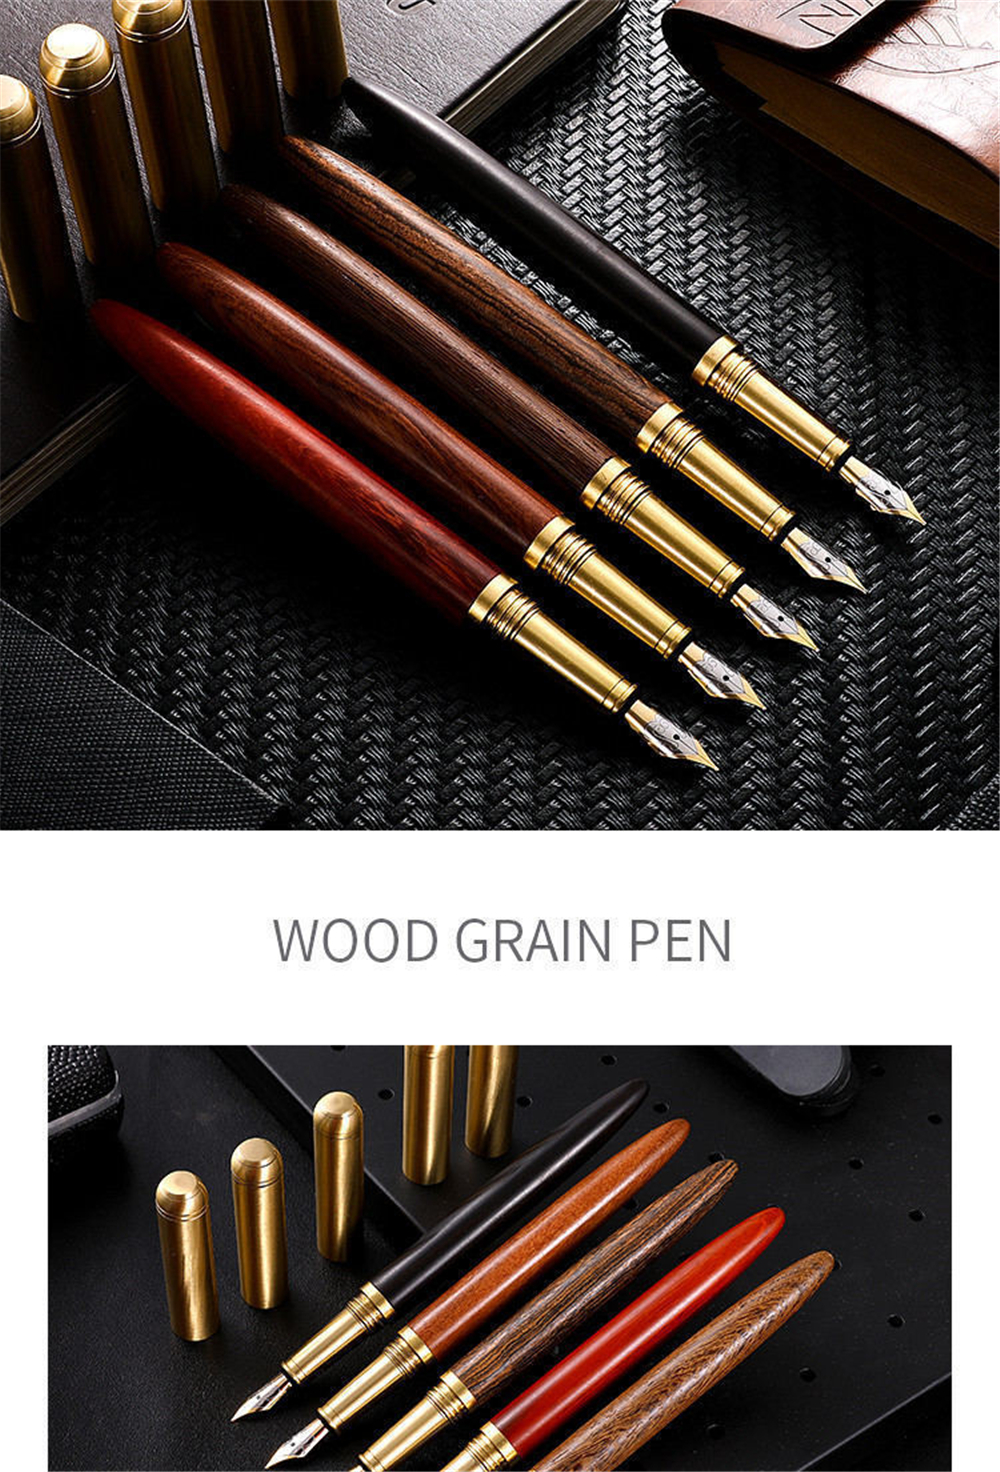 07mm-Nib-Wood-Fountain-Pen-Ink-Classic-Metal-Wood-Pen-Calligraphy-Writing-Business-Gifts-Stationery--1782368-1